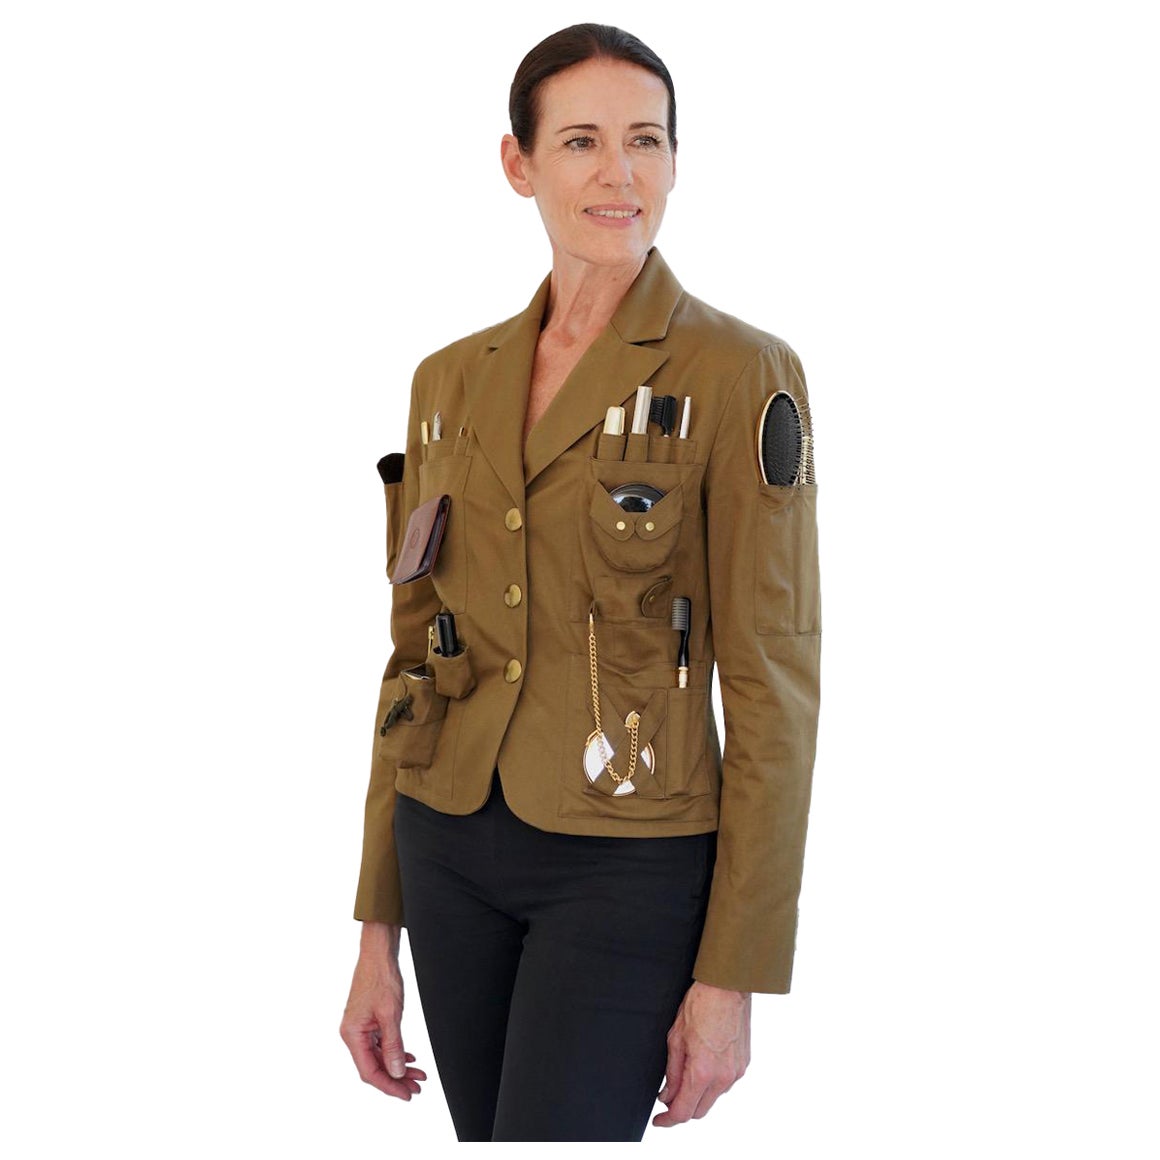 MOSCHINO COUTURE! Repetita Juvant S/S 1994 Khaki Beauty Tools "Survival Jacket" For Sale